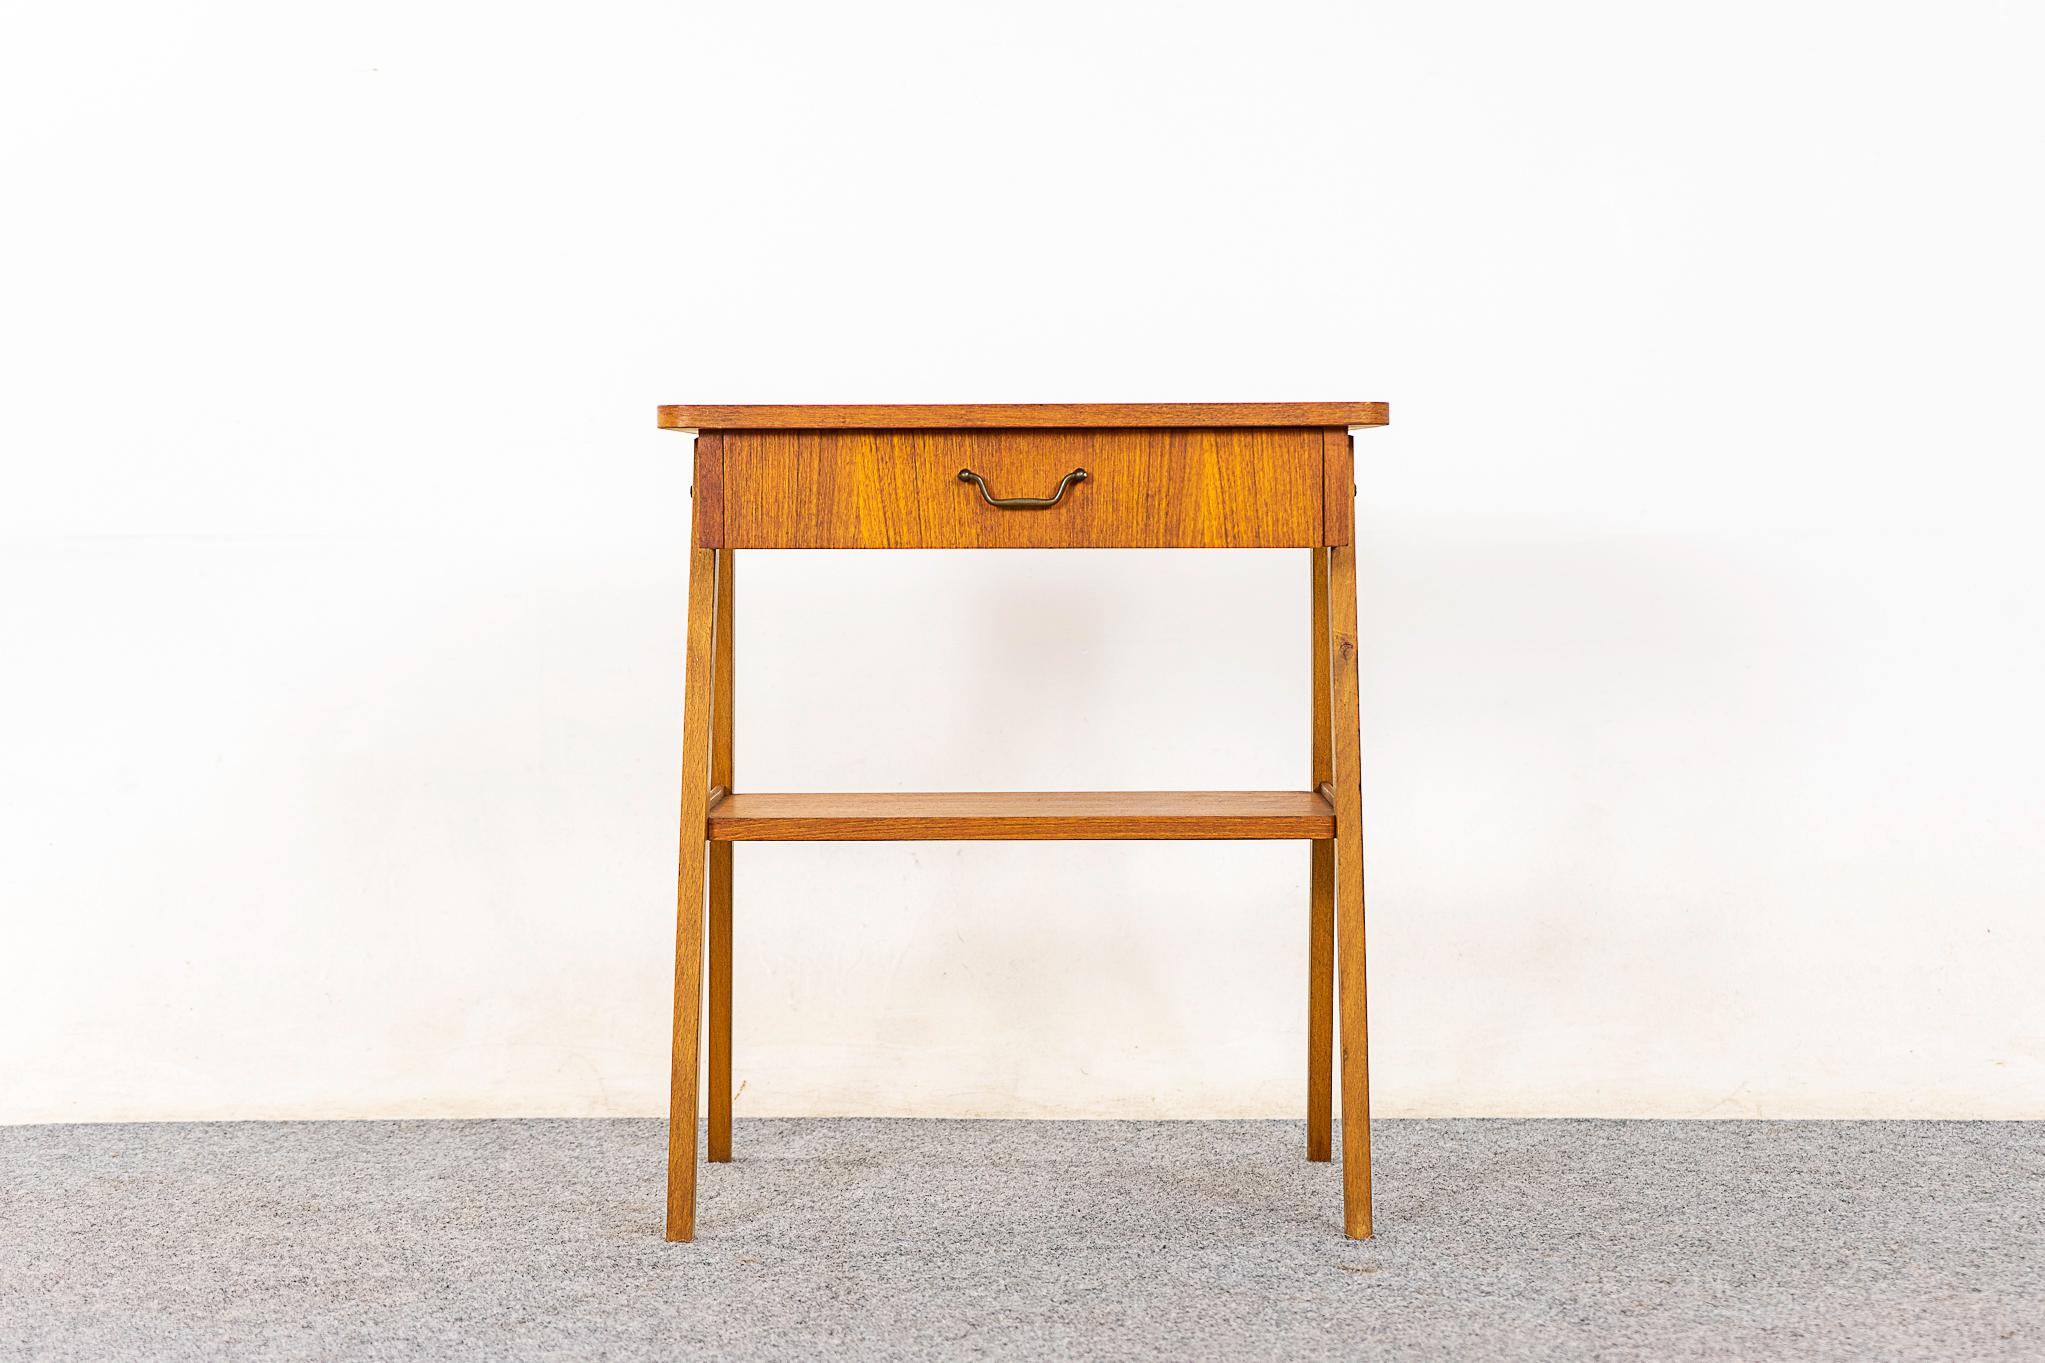 Teak bedside table, circa 1960's. Veneered case with slender splayed legs with metal accents. Sleek drawer with a lovely metal finger pull and handy lower shelf!

Please inquire for remote and internationals shipping rates.